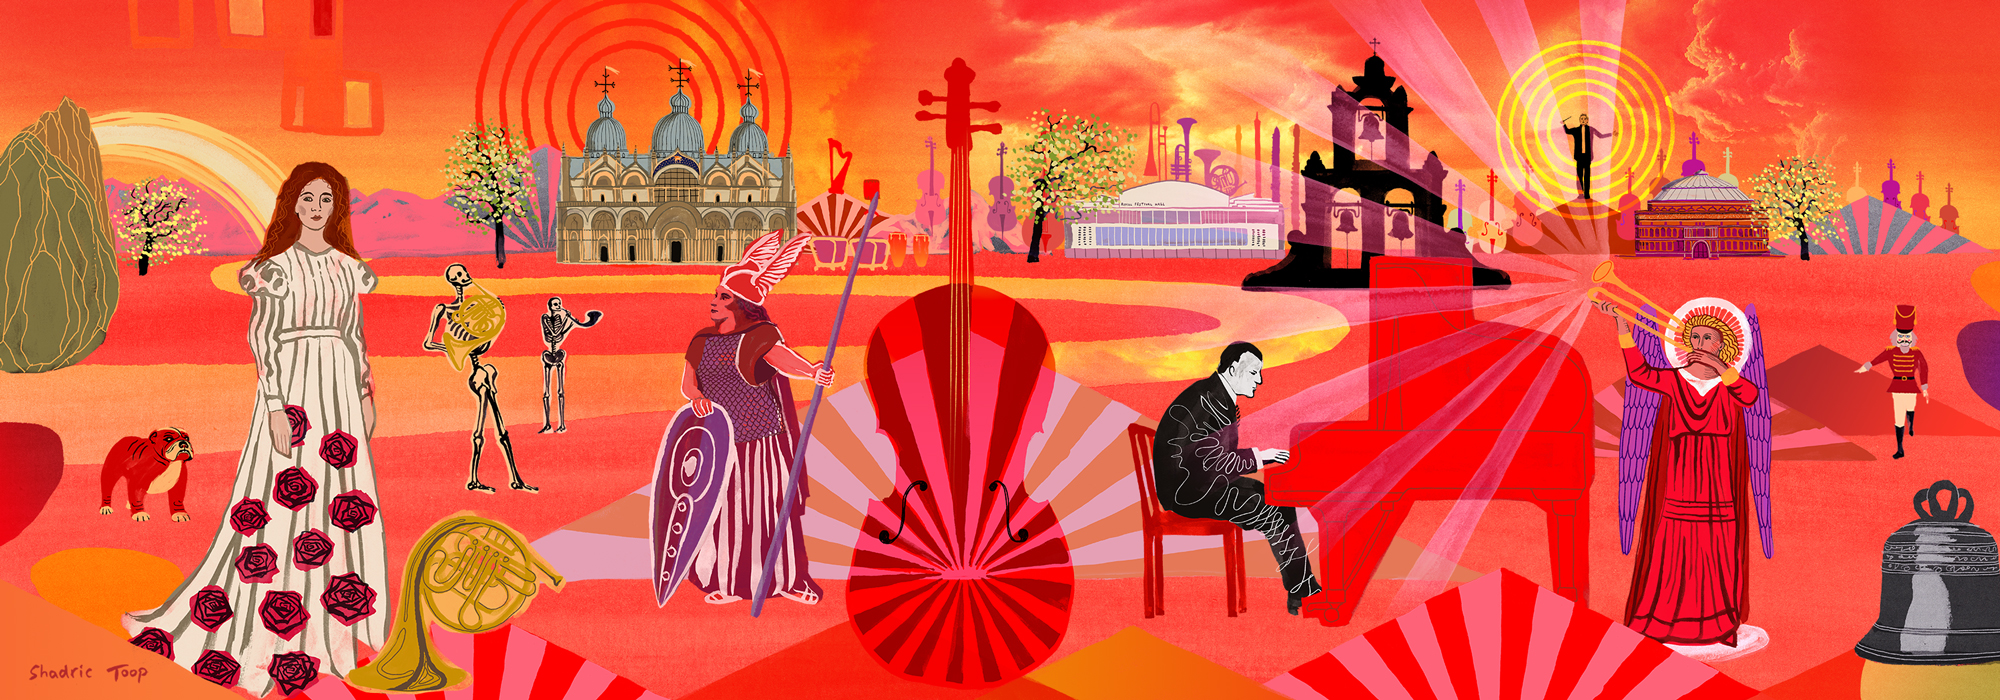 An artwork image showing an orange landscape with a pianist, and angel playing a trumpet, a woman in a rose-covered dress, a bulldog, a Wagnerian Valkyrie, the Royal Festival Hall and Royal Albert Hall, a cello, skeletons playing french horns, a structure with large hanging bells and Vasily Petrenko conducting on a hill. 